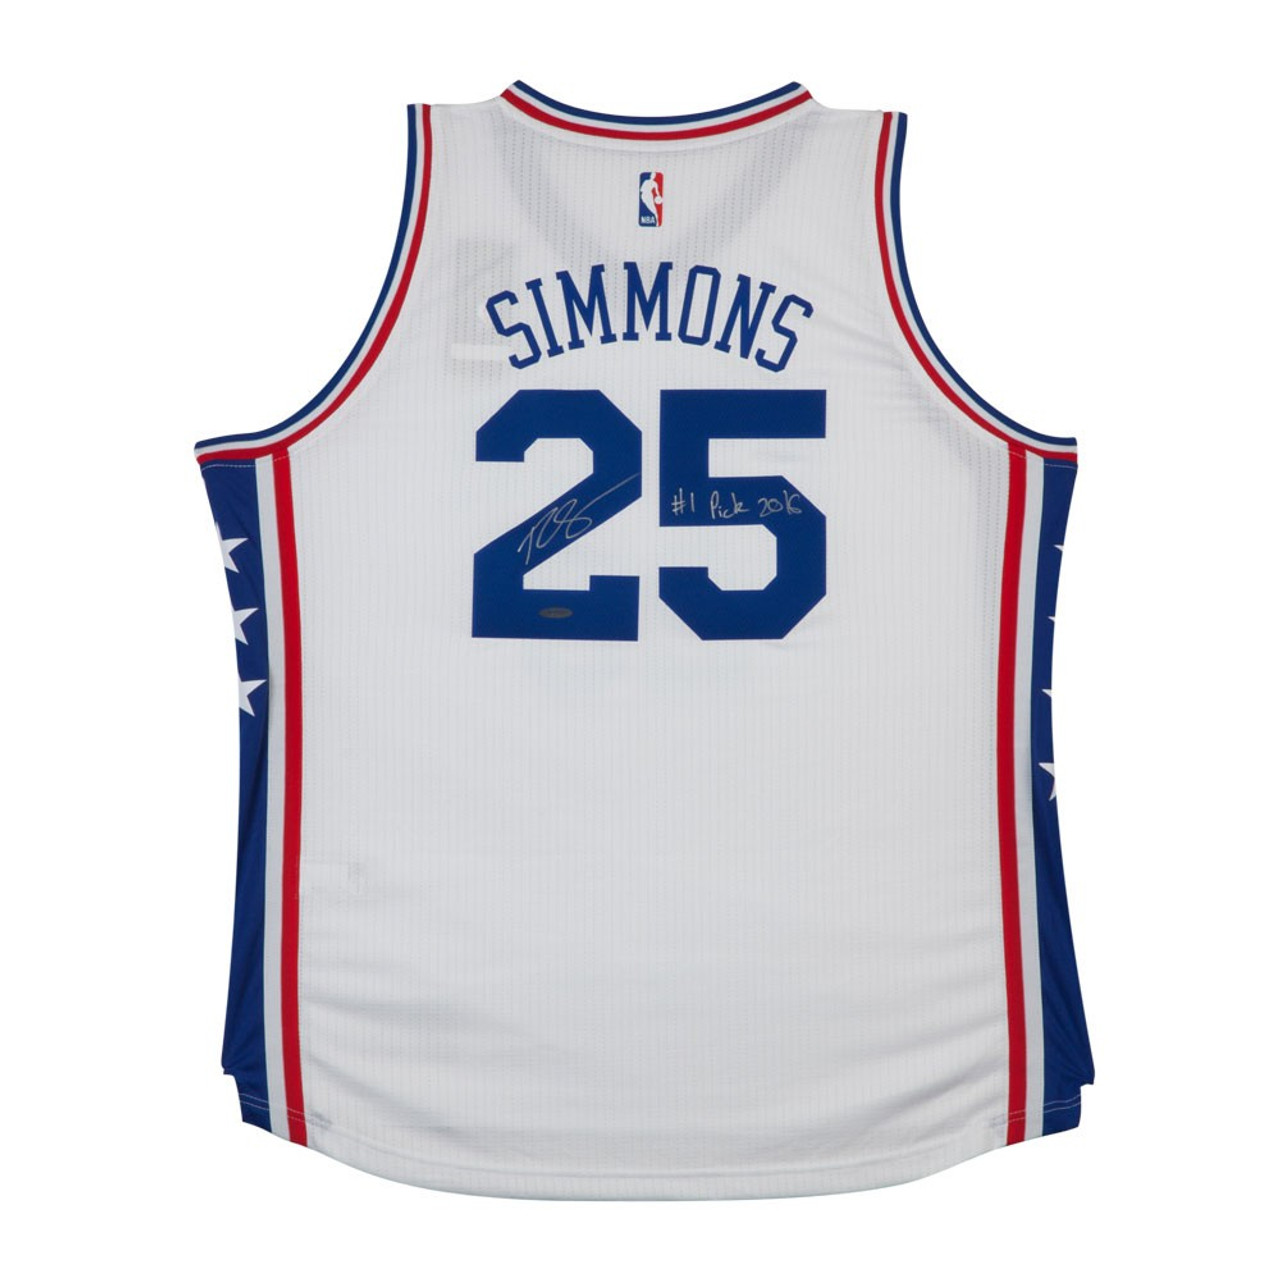 BEN SIMMONS Autographed & Inscribed 76ers Home Jersey UDA - Game Day Legends